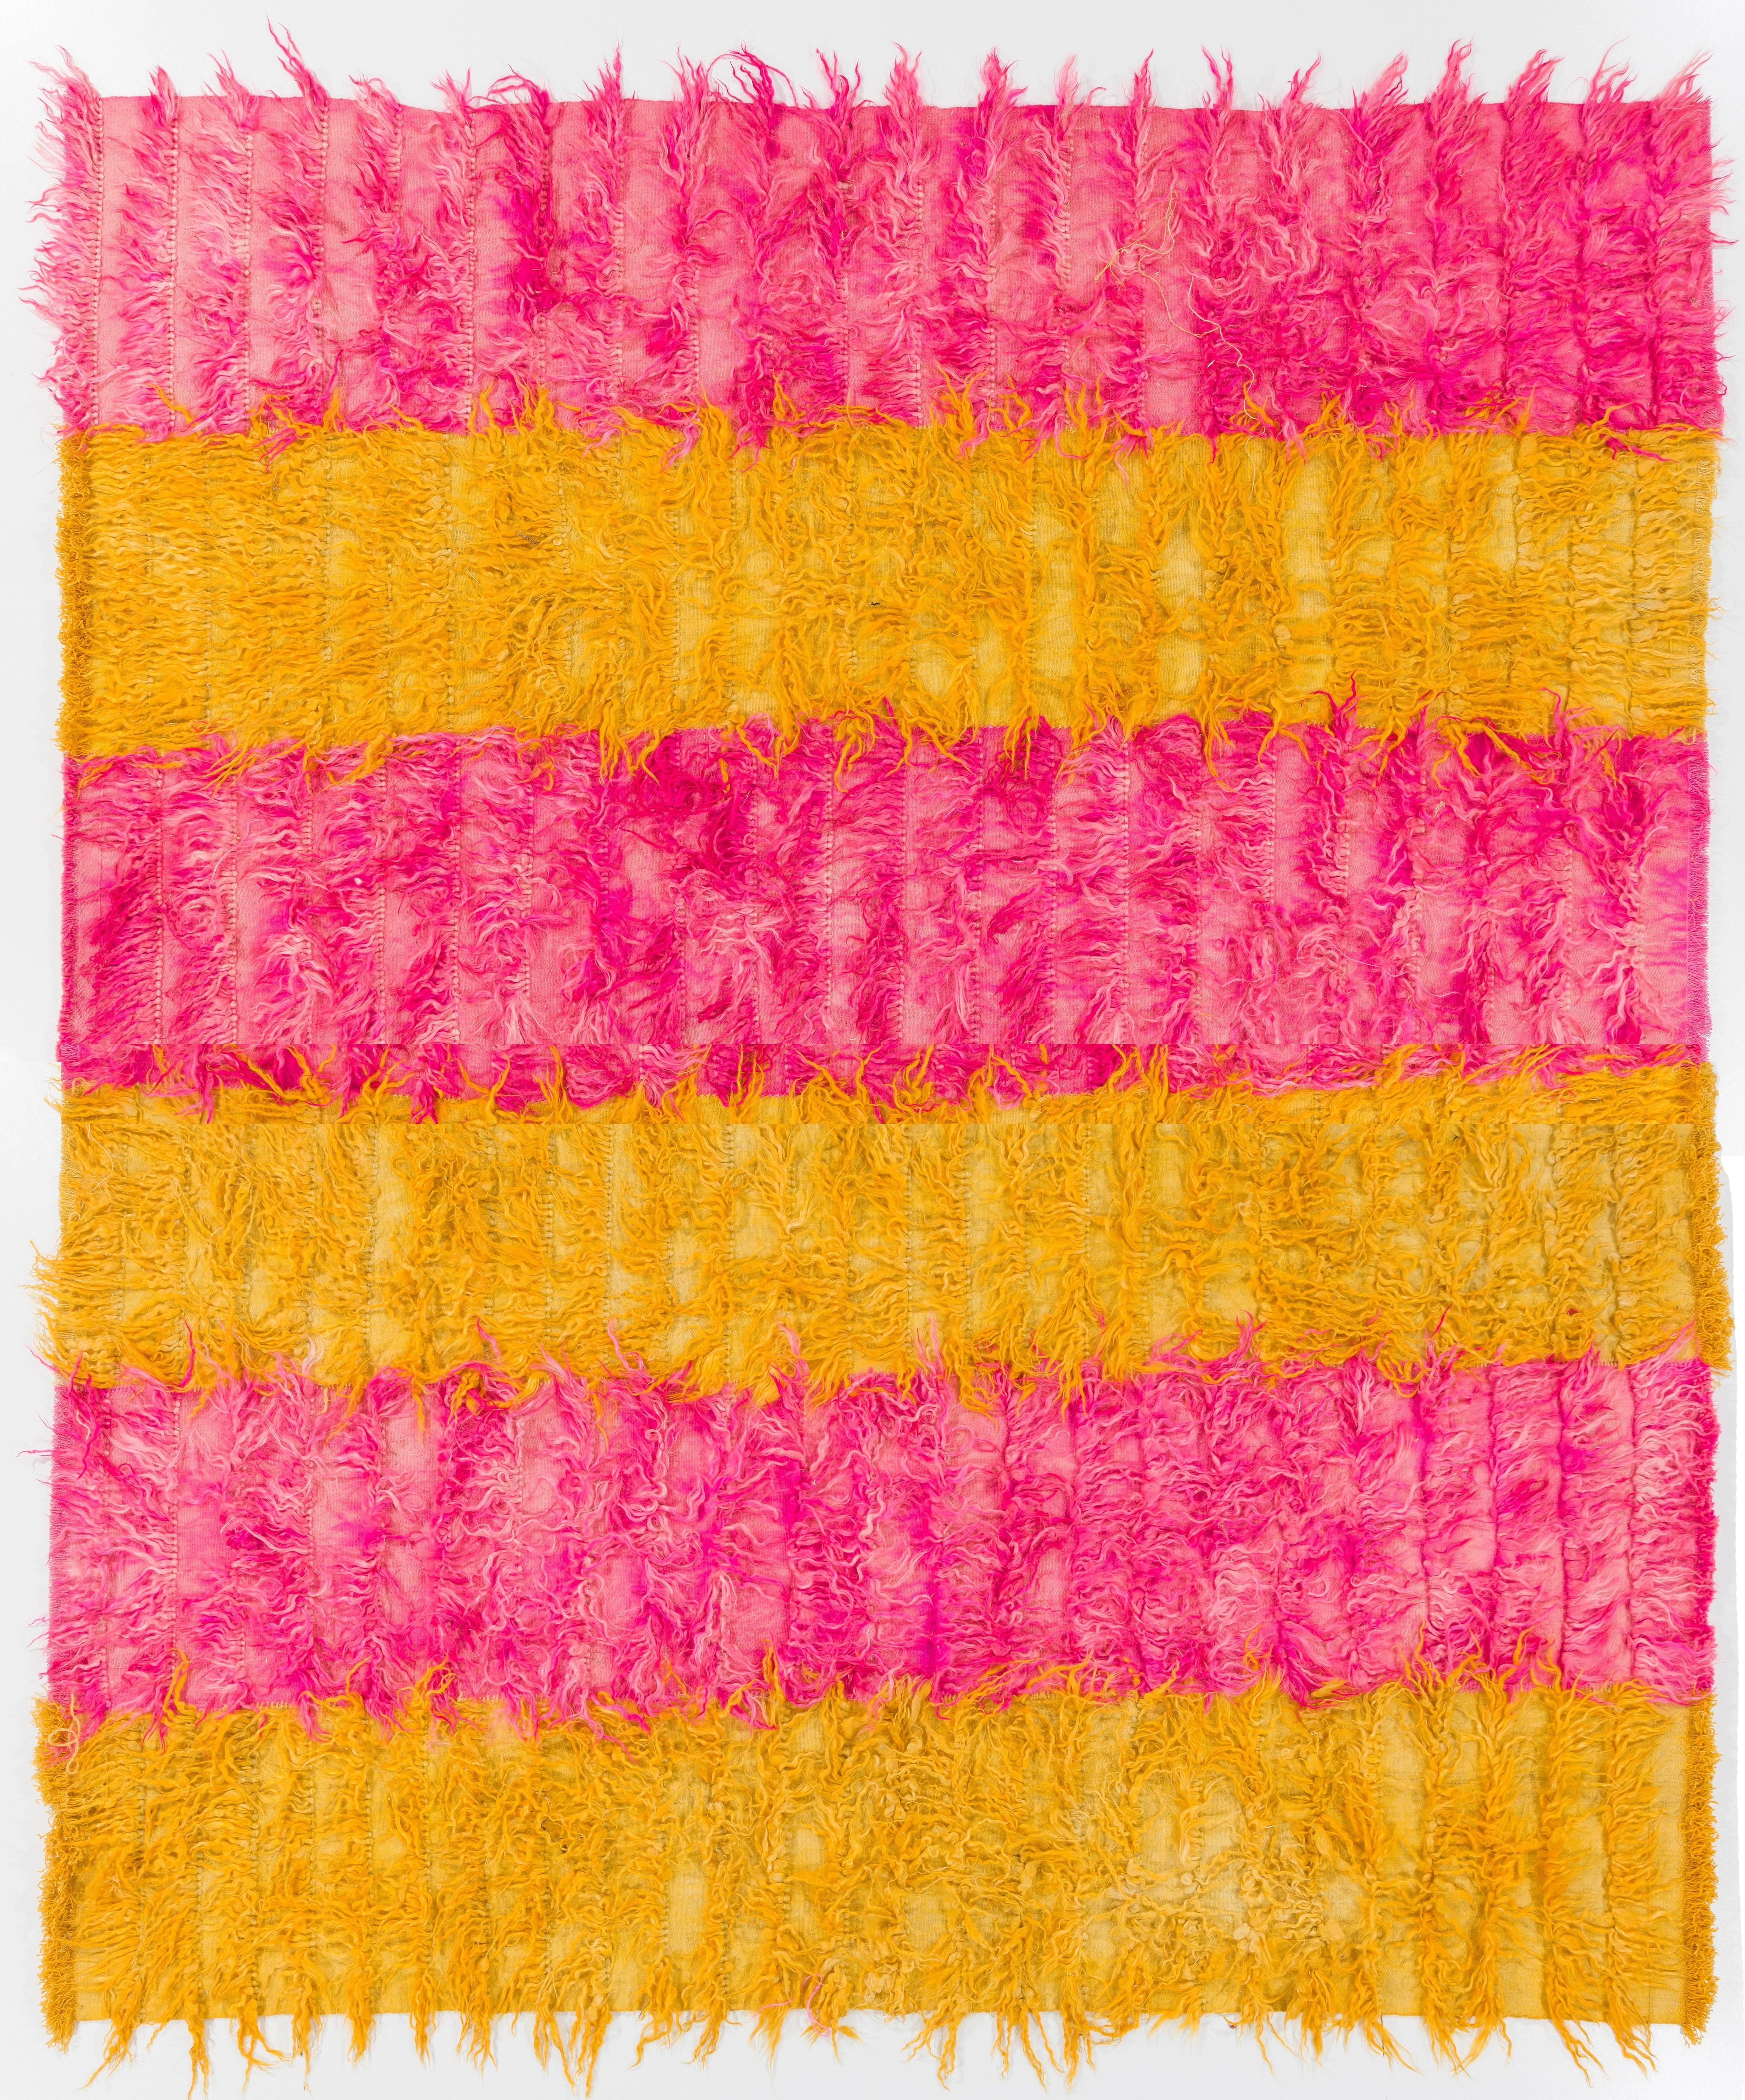 Modern 8x10 Ft Vintage Pink & Yellow Shag Pile Rug, 100% Wool. Custom Options Available For Sale